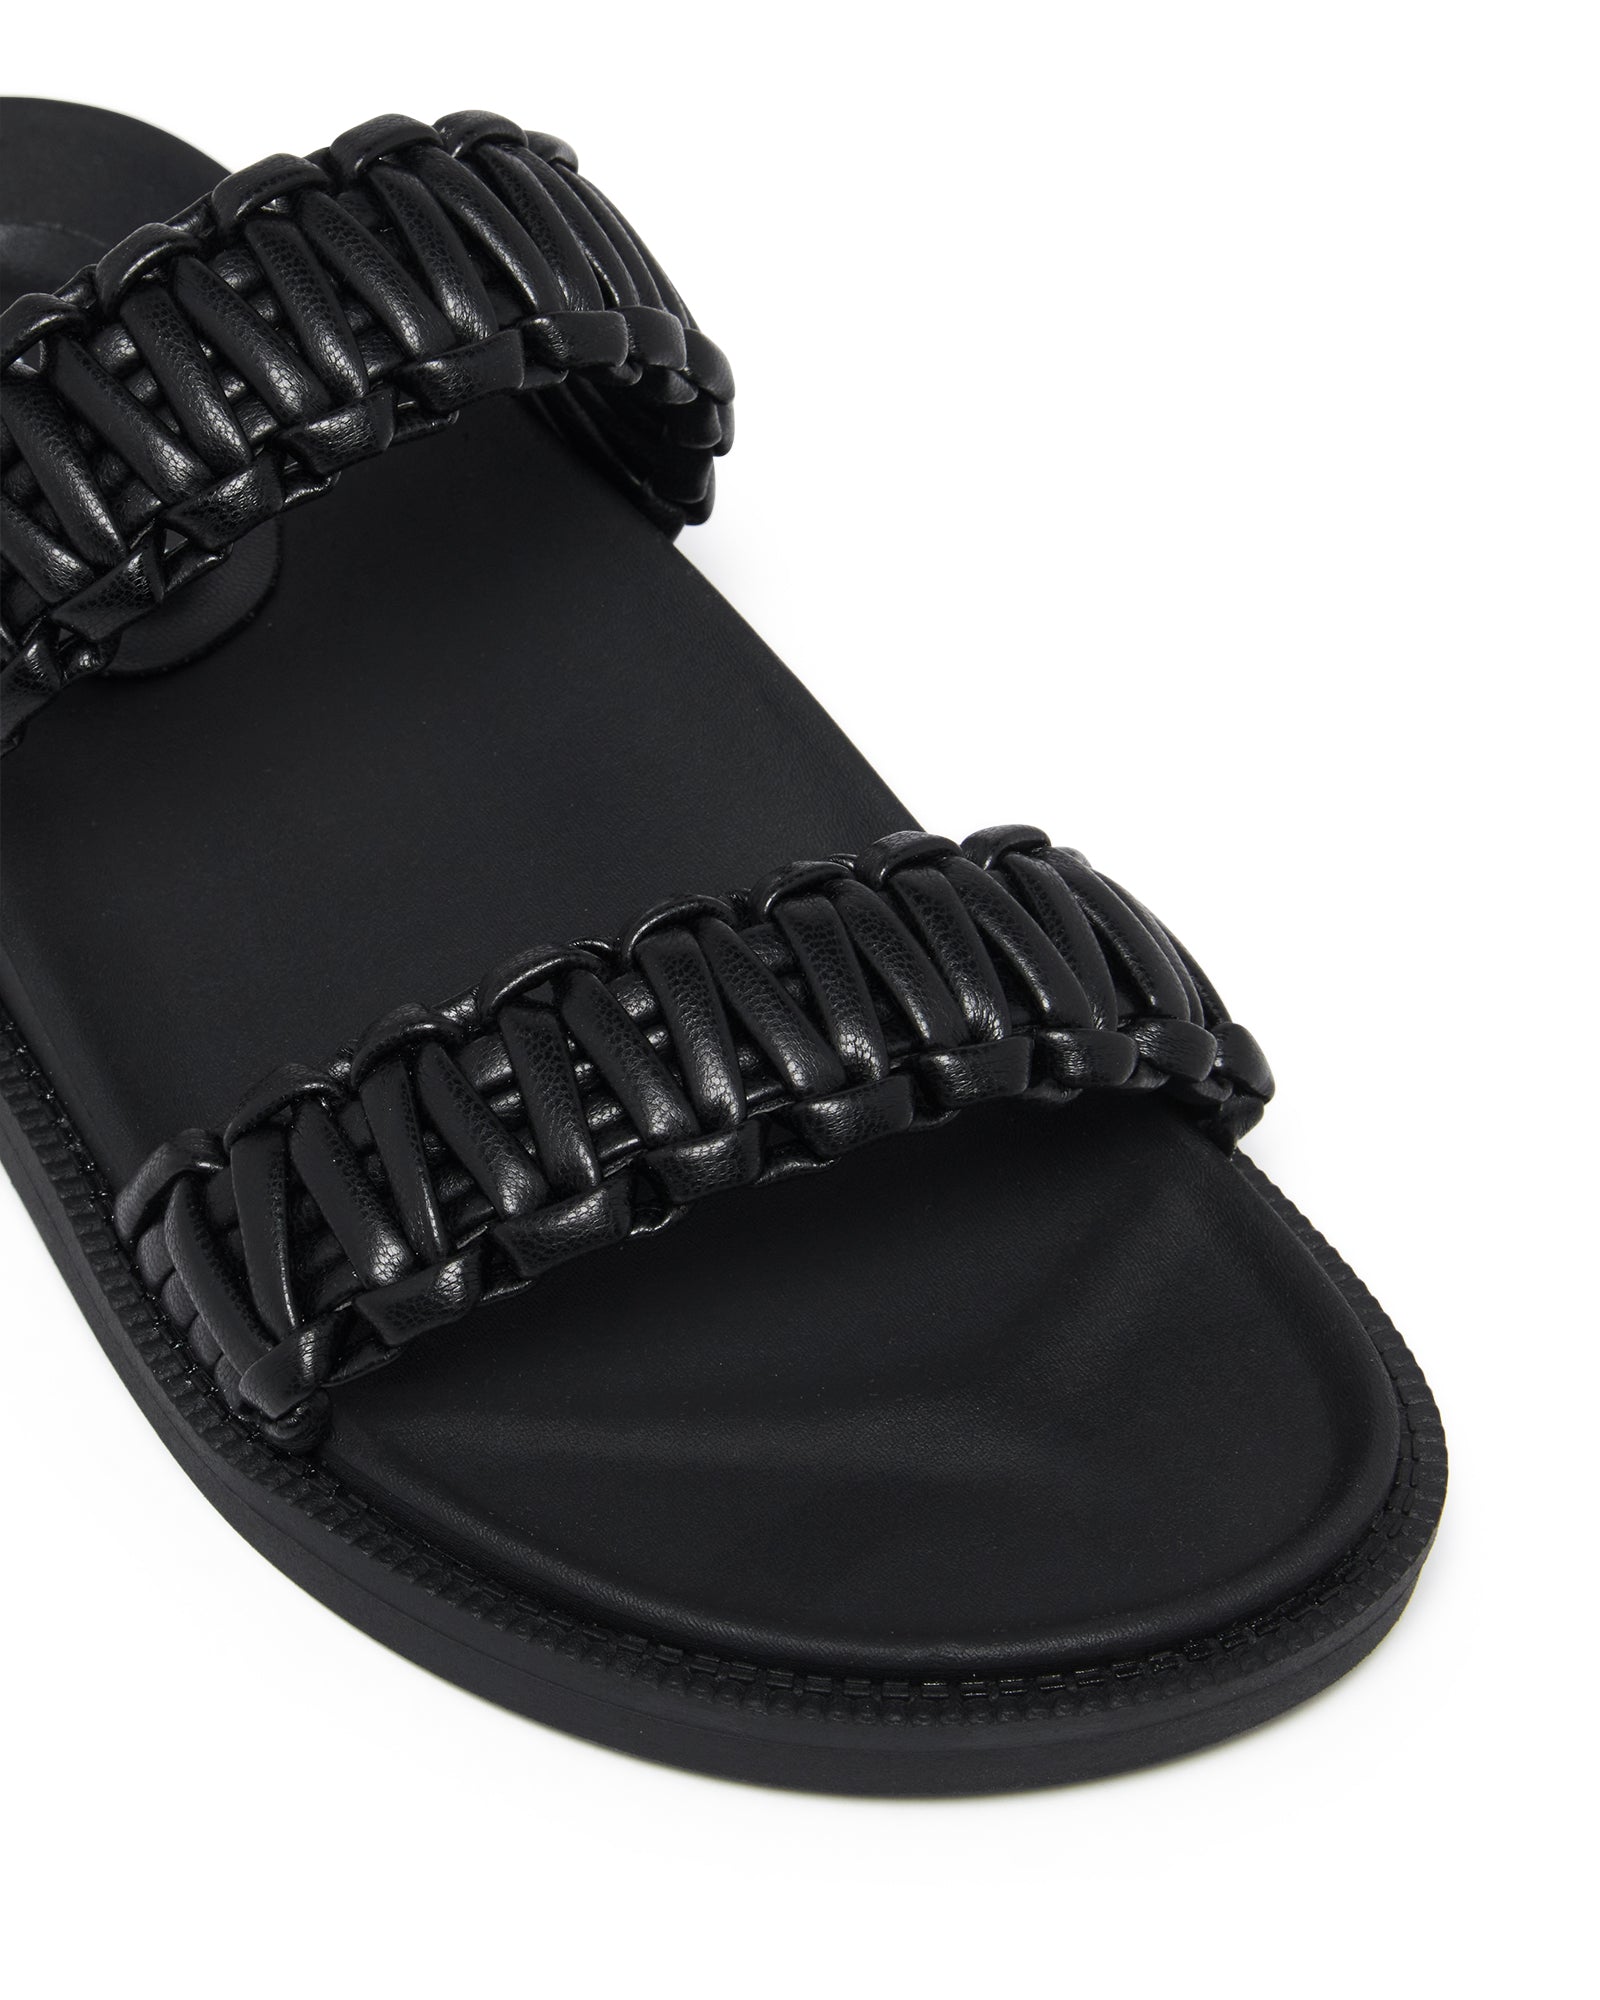 Therapy Shoes Edie Black | Women's Sandals | Slides | Flats | Woven